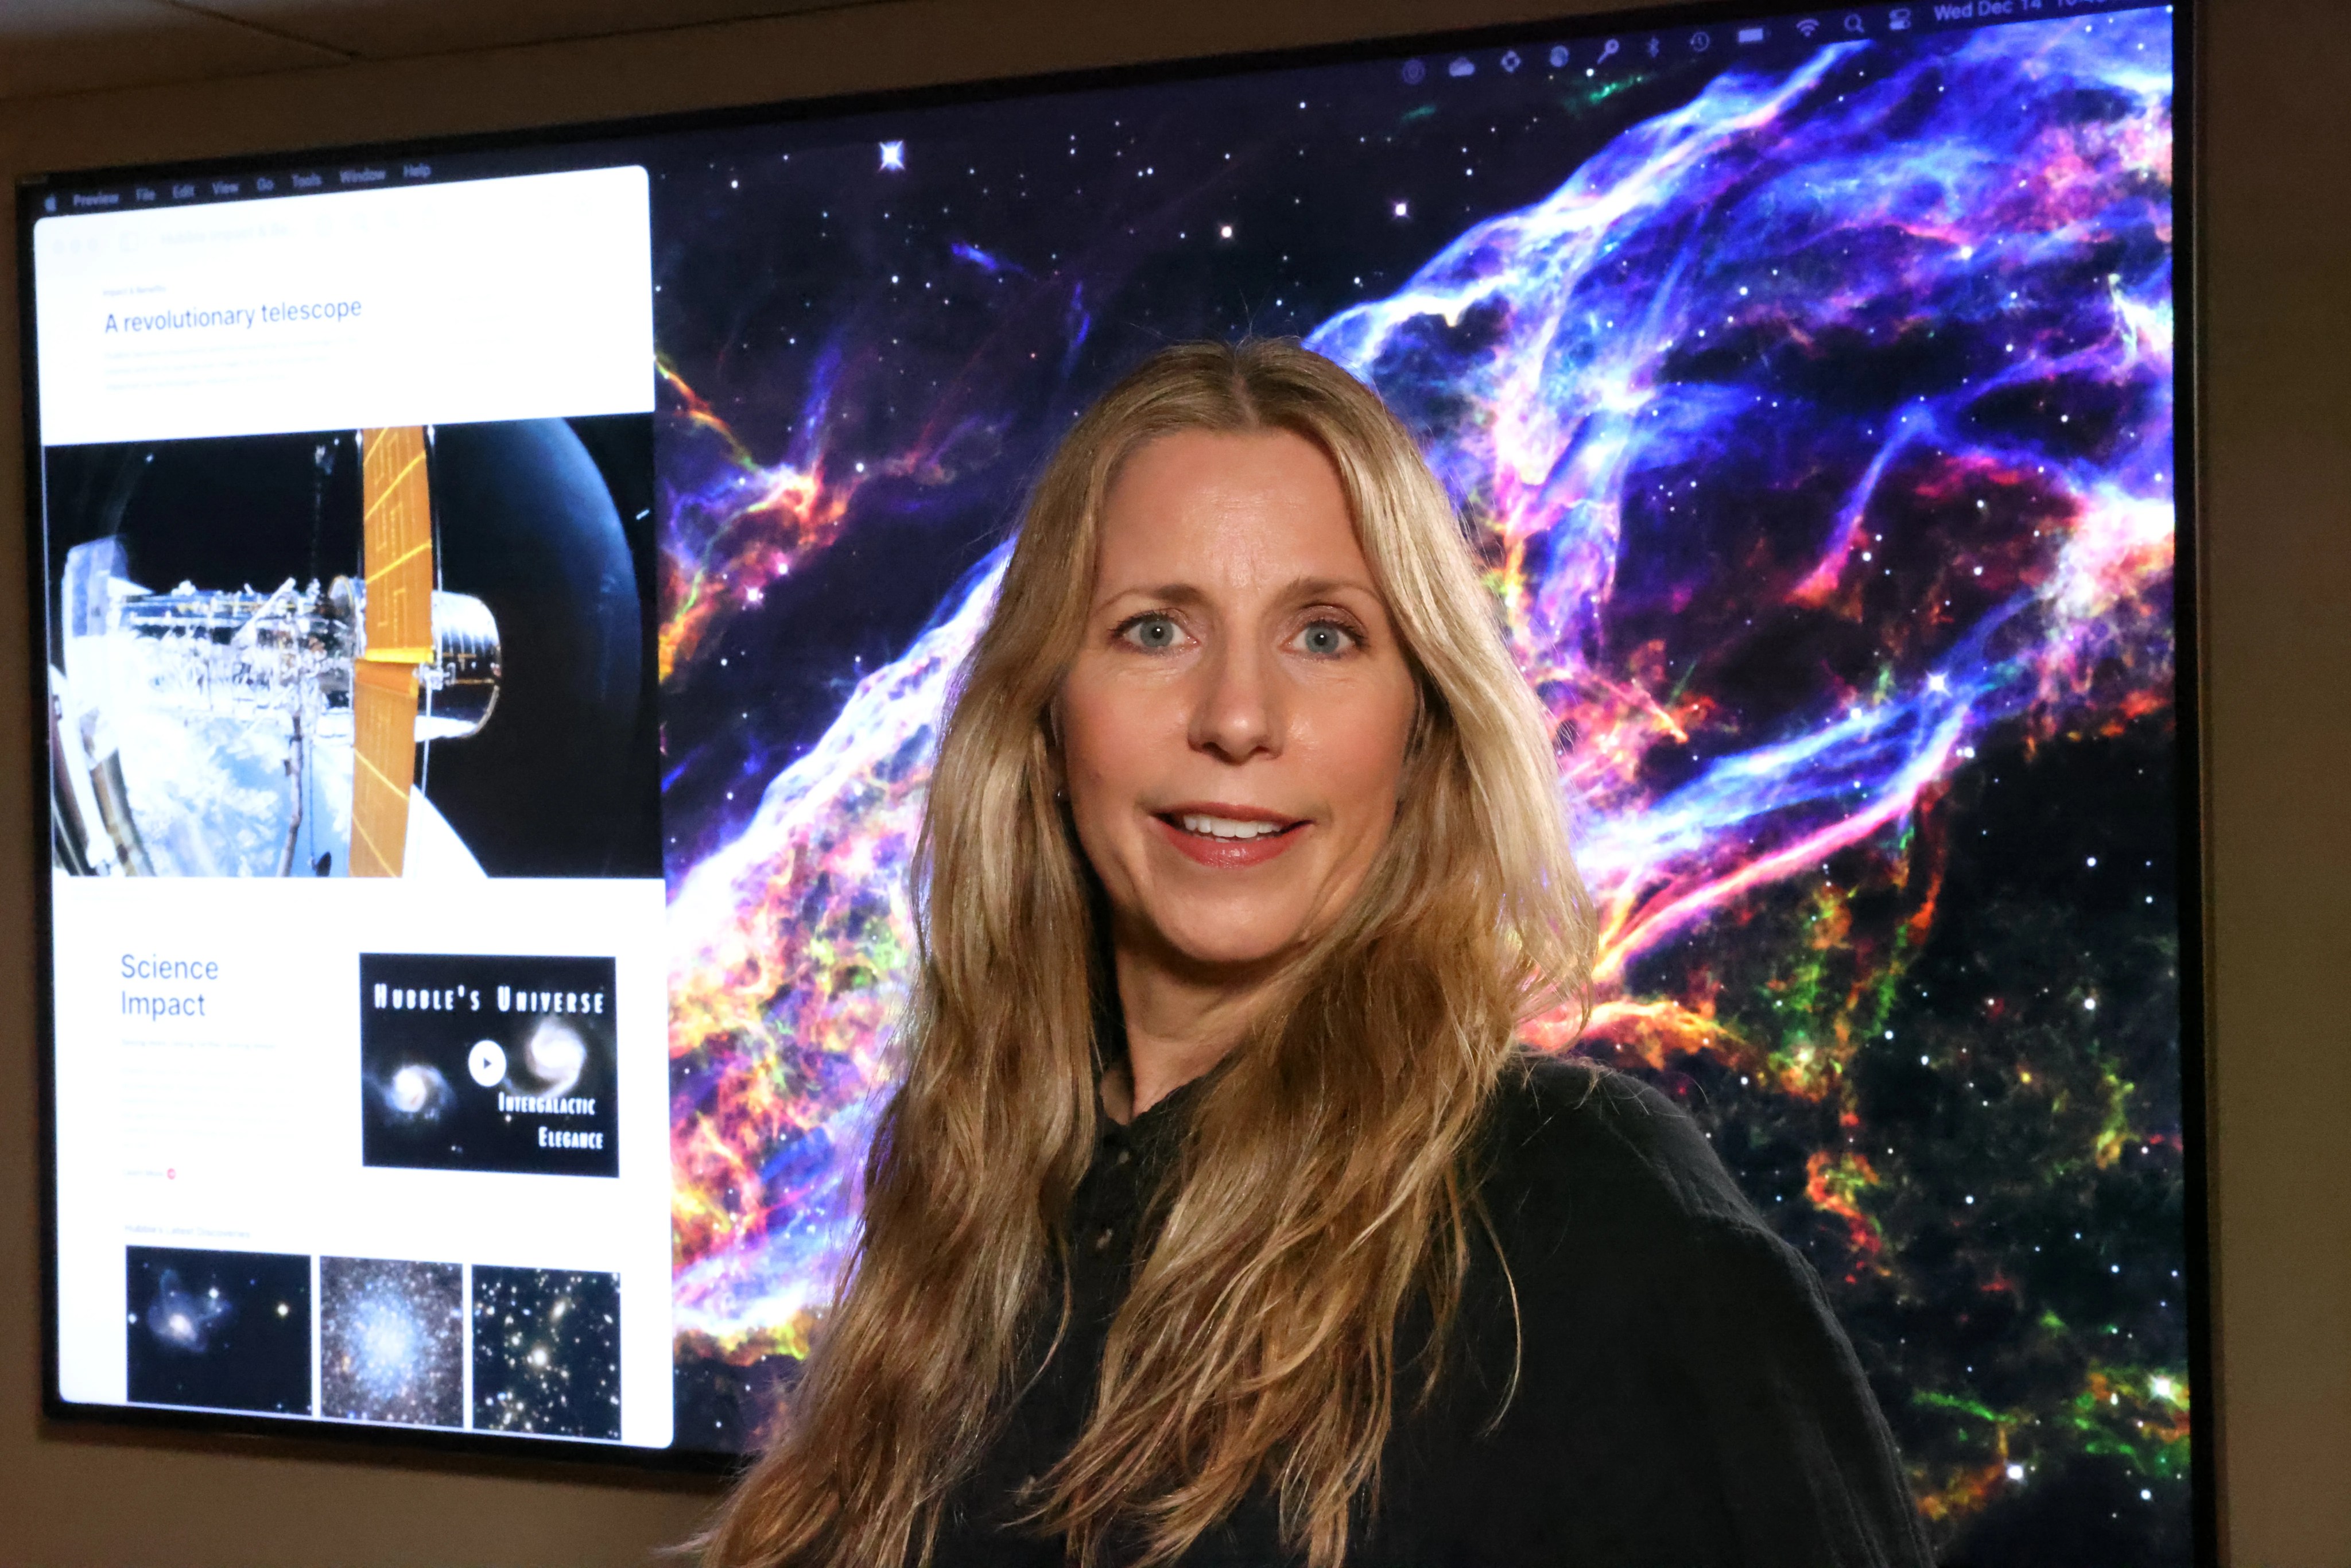 headshot of a woman with blonde hair in a black shirt standing in front of a hubble image on a tv monitor